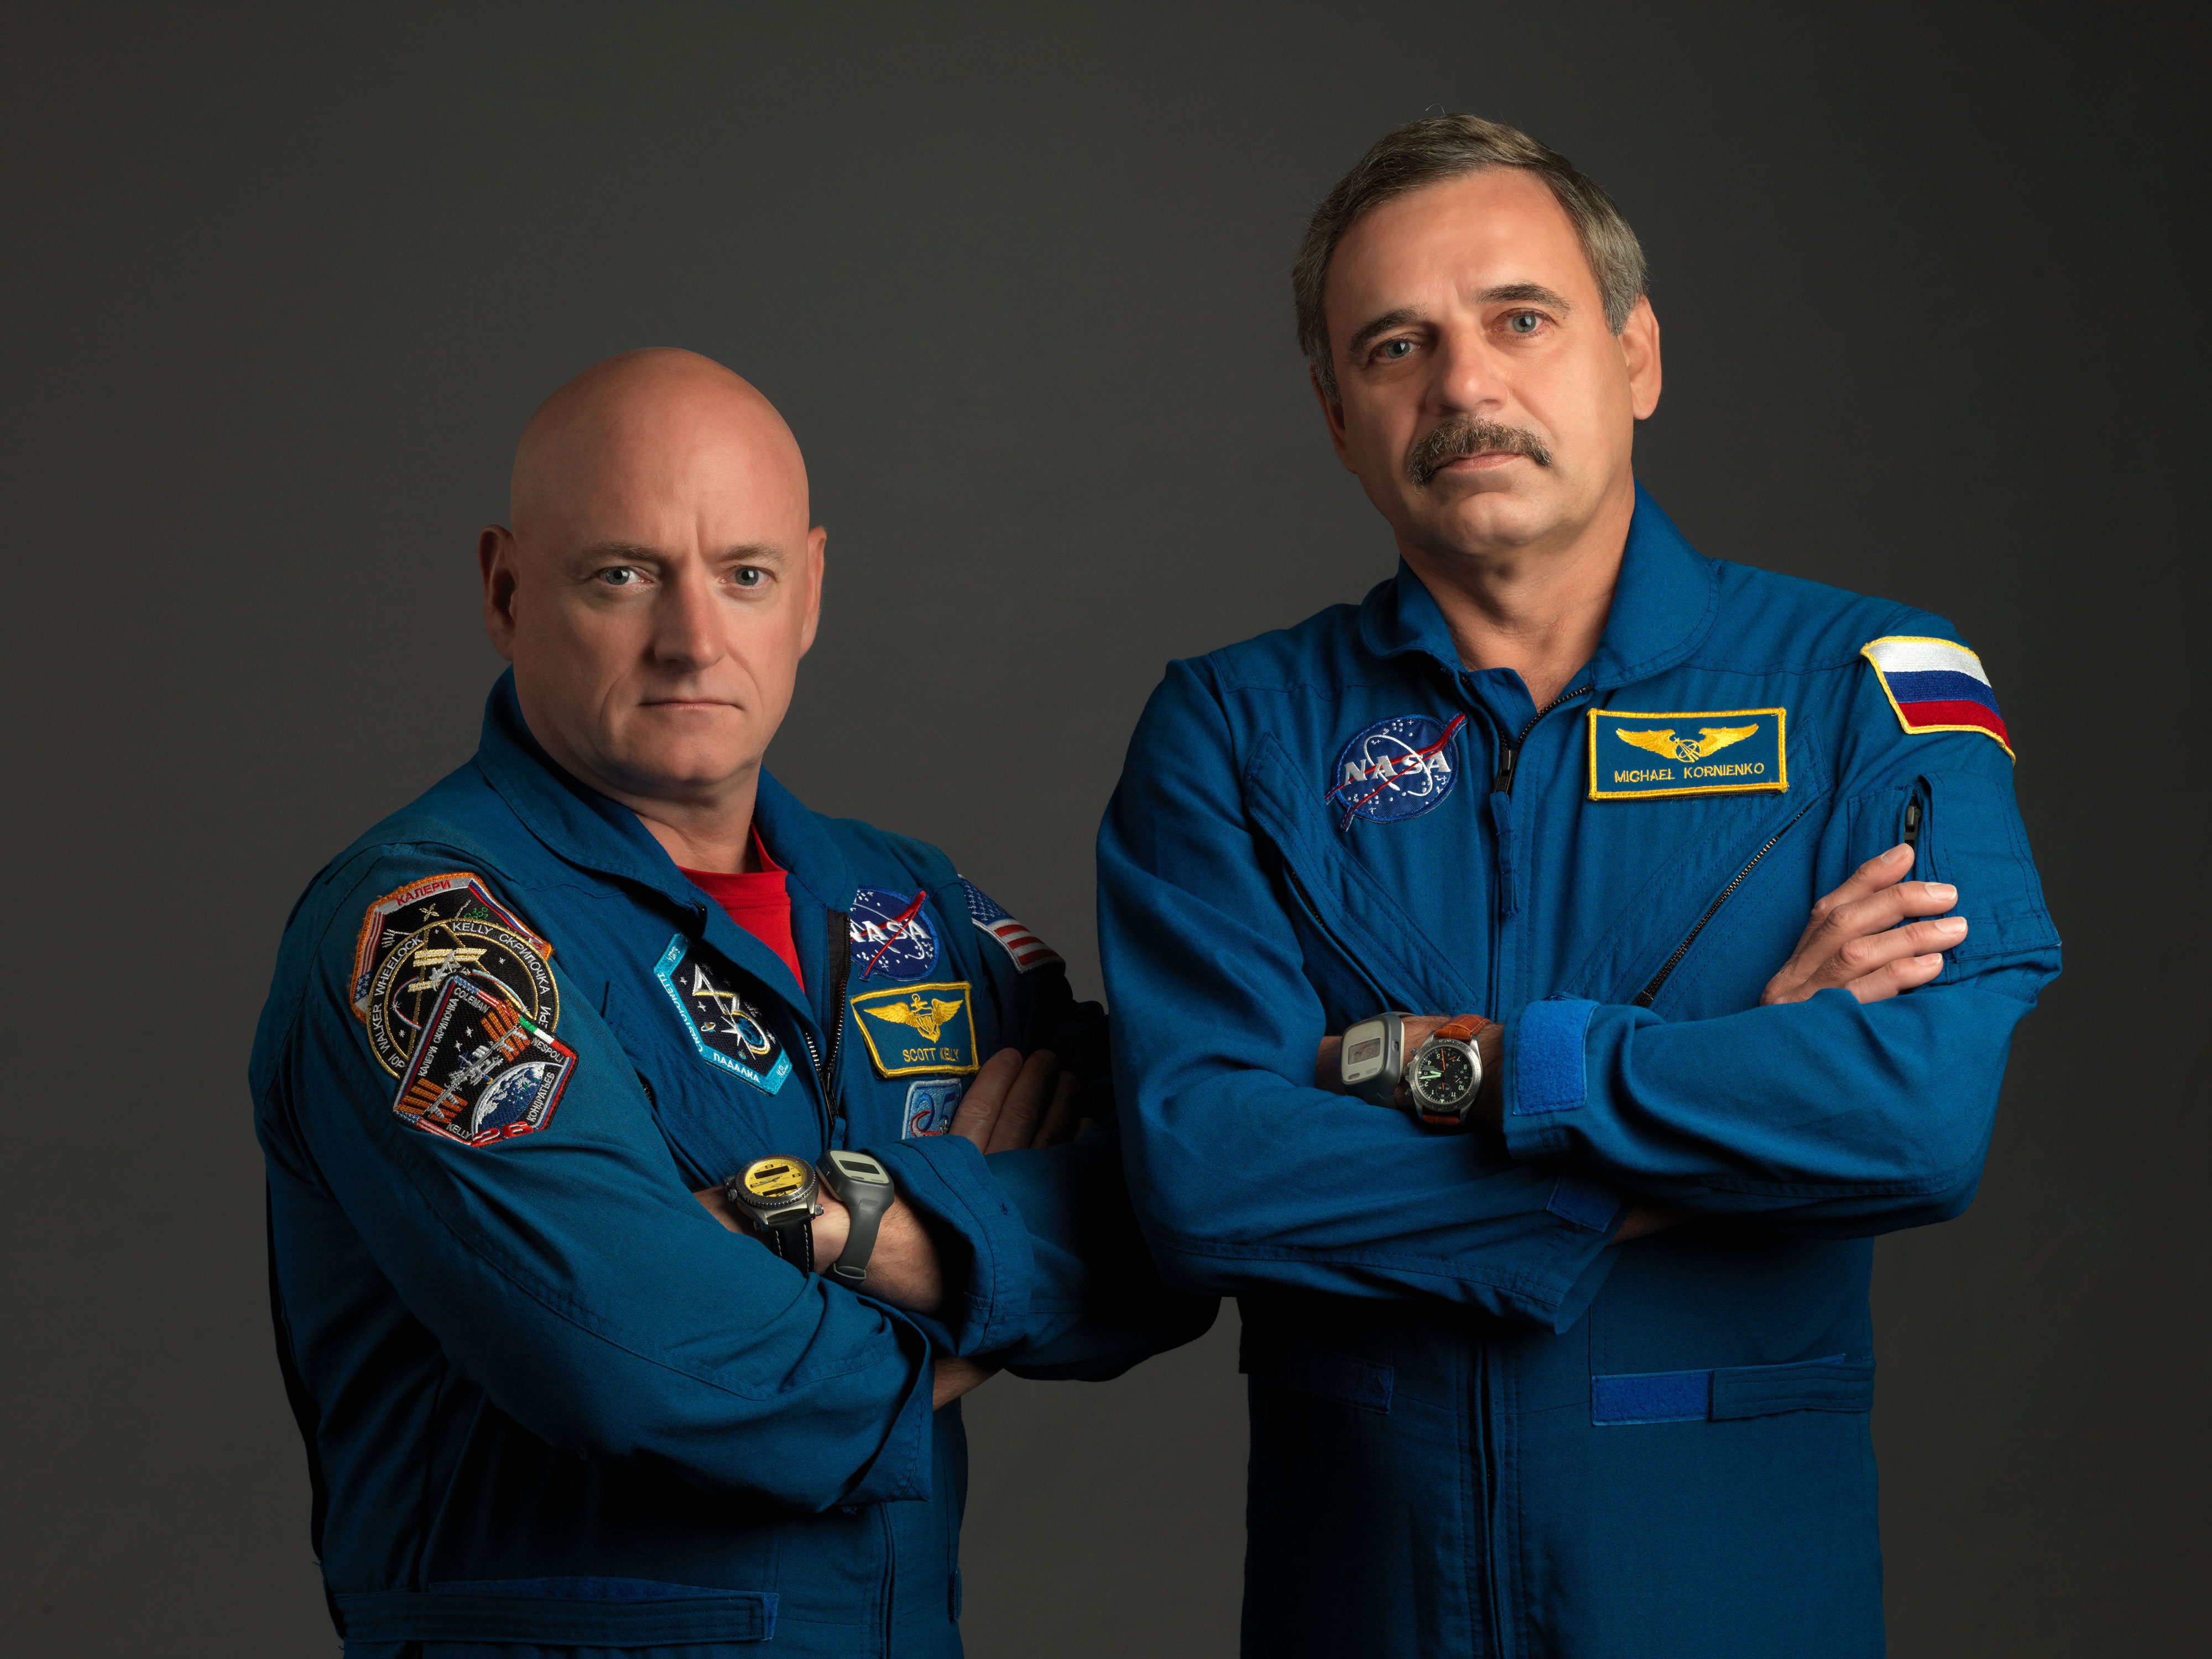 NASA astronaut Scott Kelly (left) and Russian cosmonaut Mikhail Kornienko are spending a year together aboard the ISS.